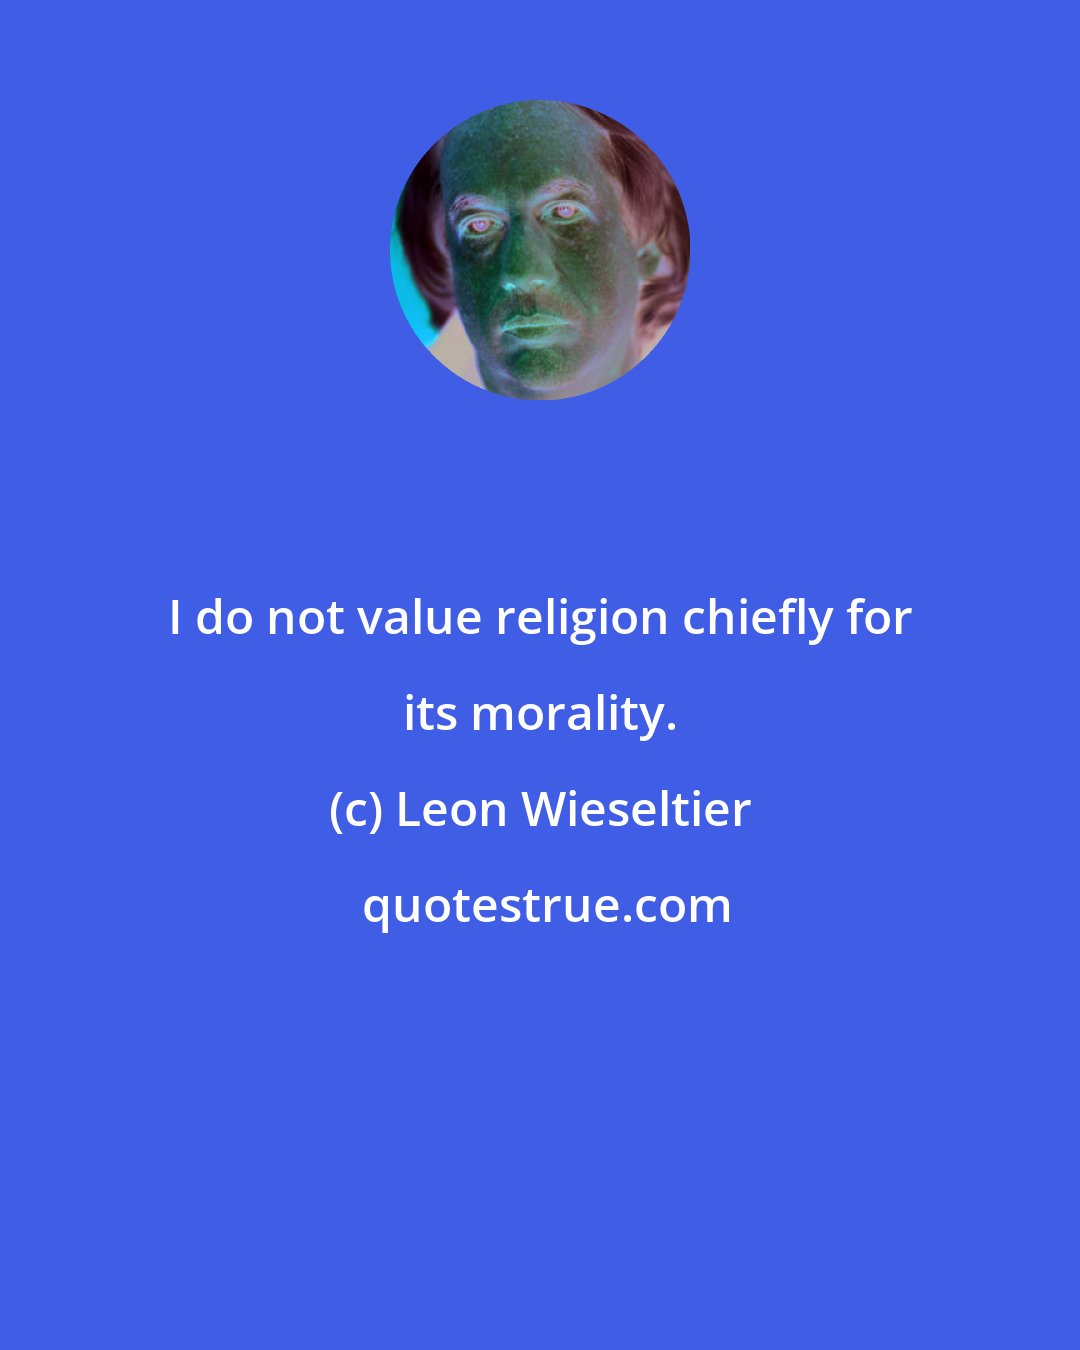 Leon Wieseltier: I do not value religion chiefly for its morality.